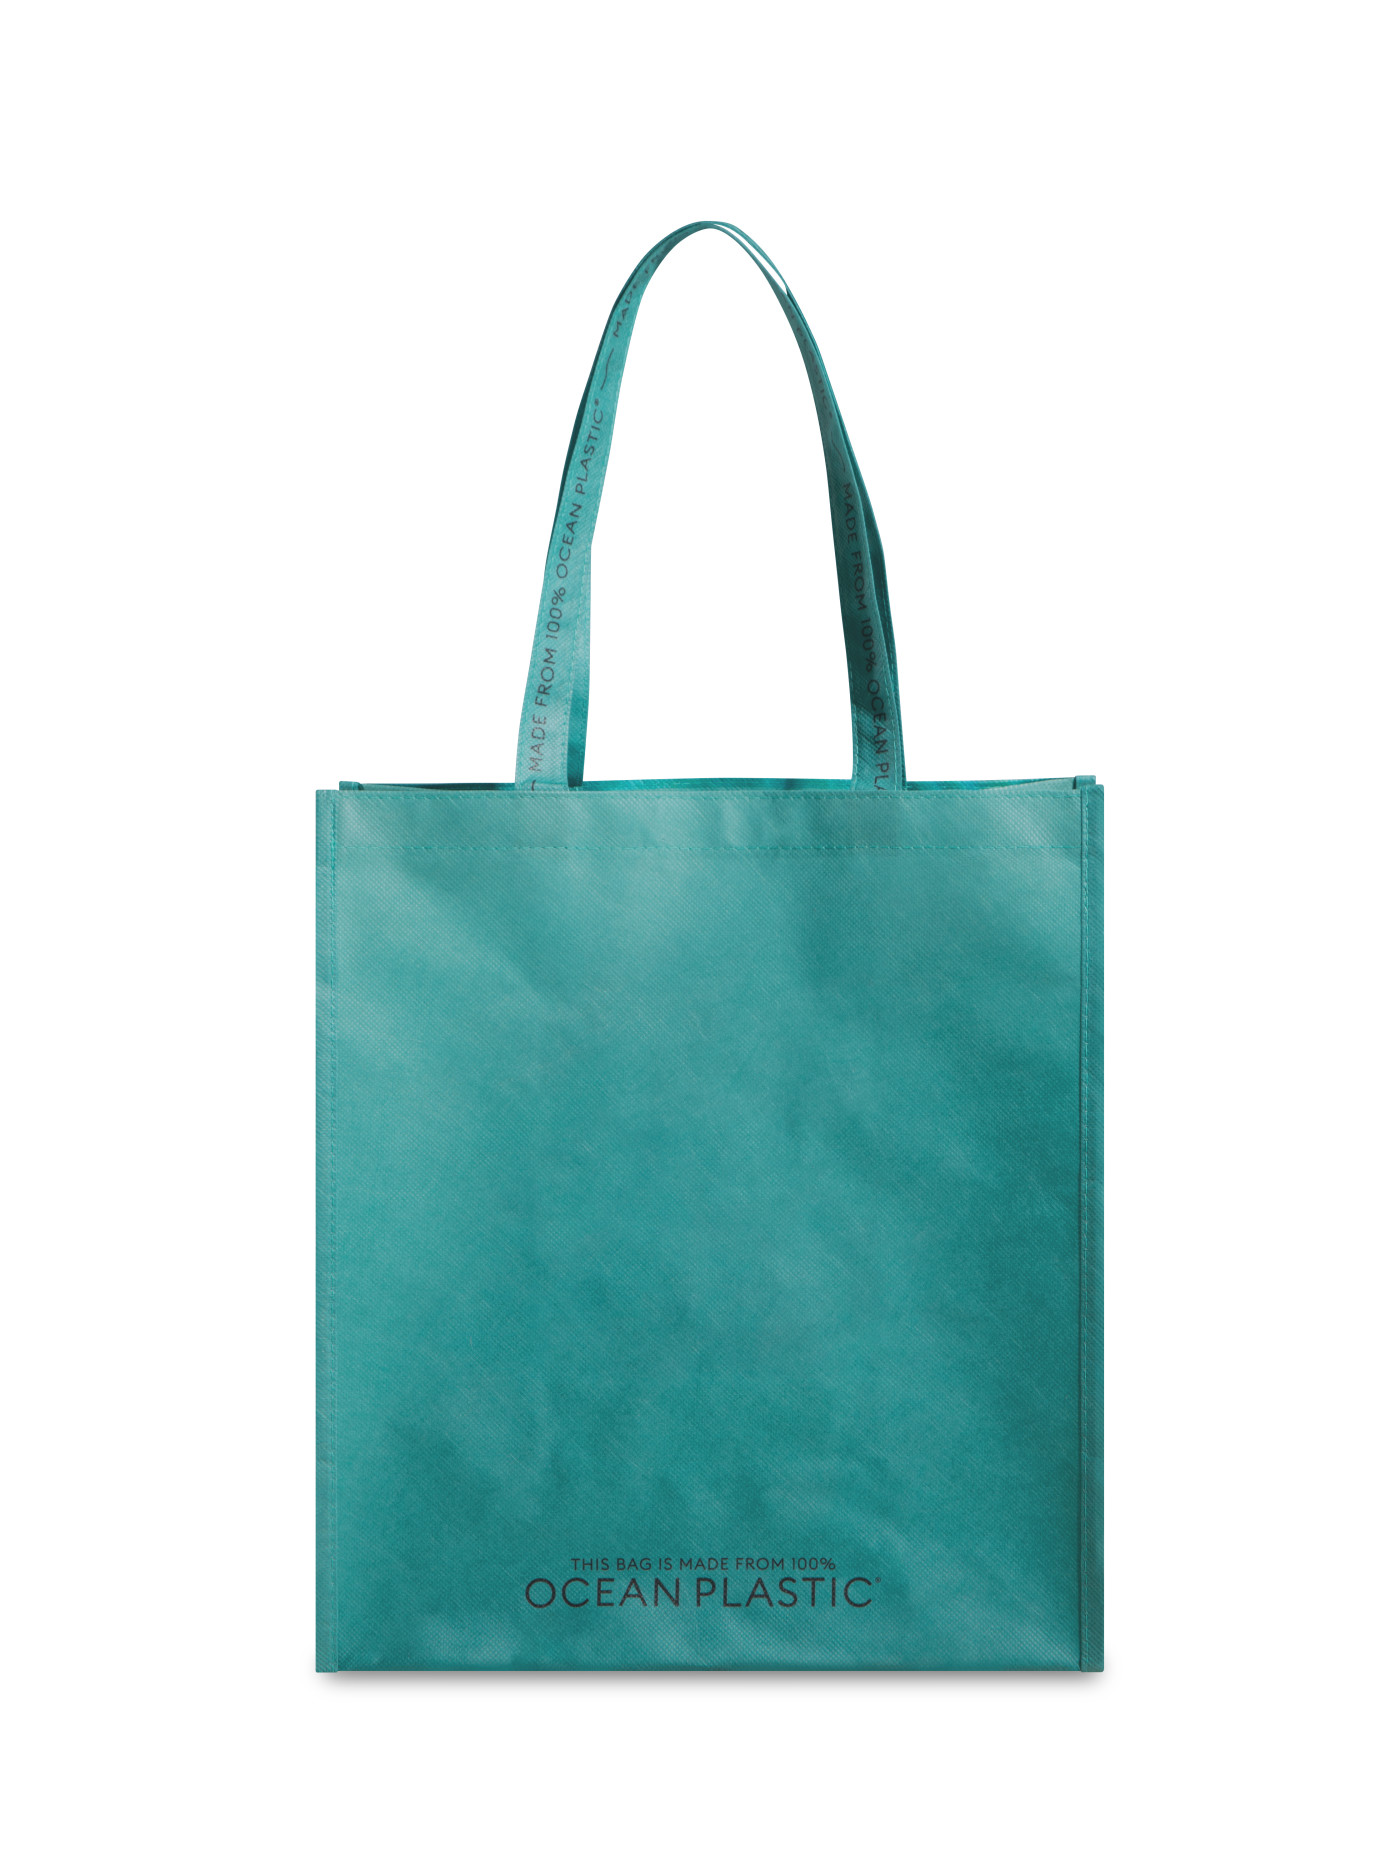 Out of The Ocean 101532 - Reusable Large Shopper